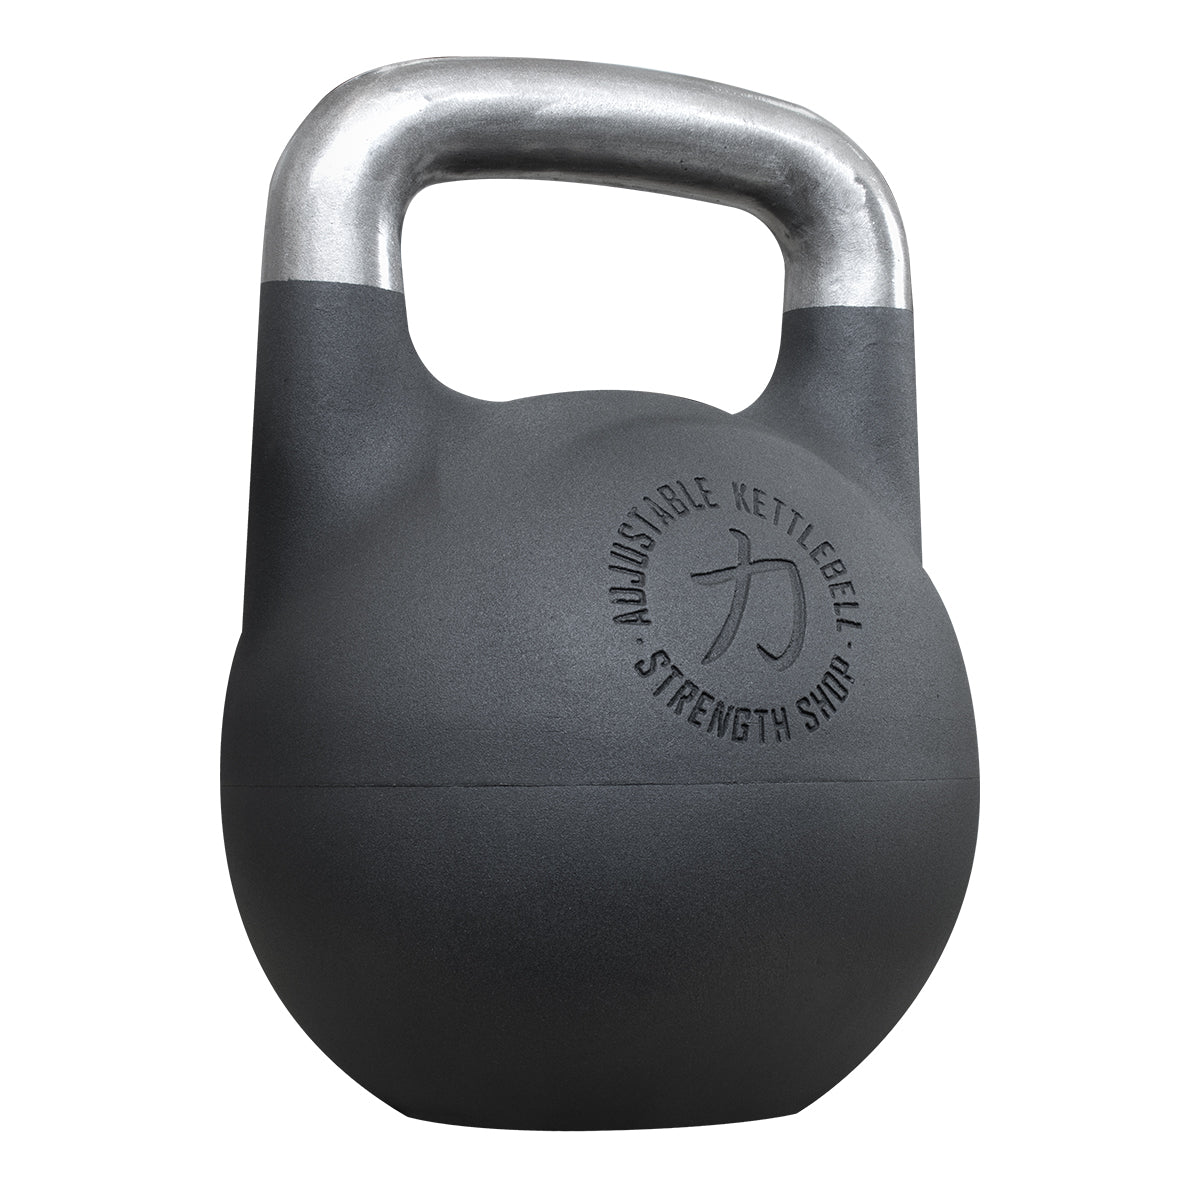 Adjustable Kettlebell 12kg-32kg, Competition Style - SHIPPING 23-28TH MAY, PREORDER - Strength Shop